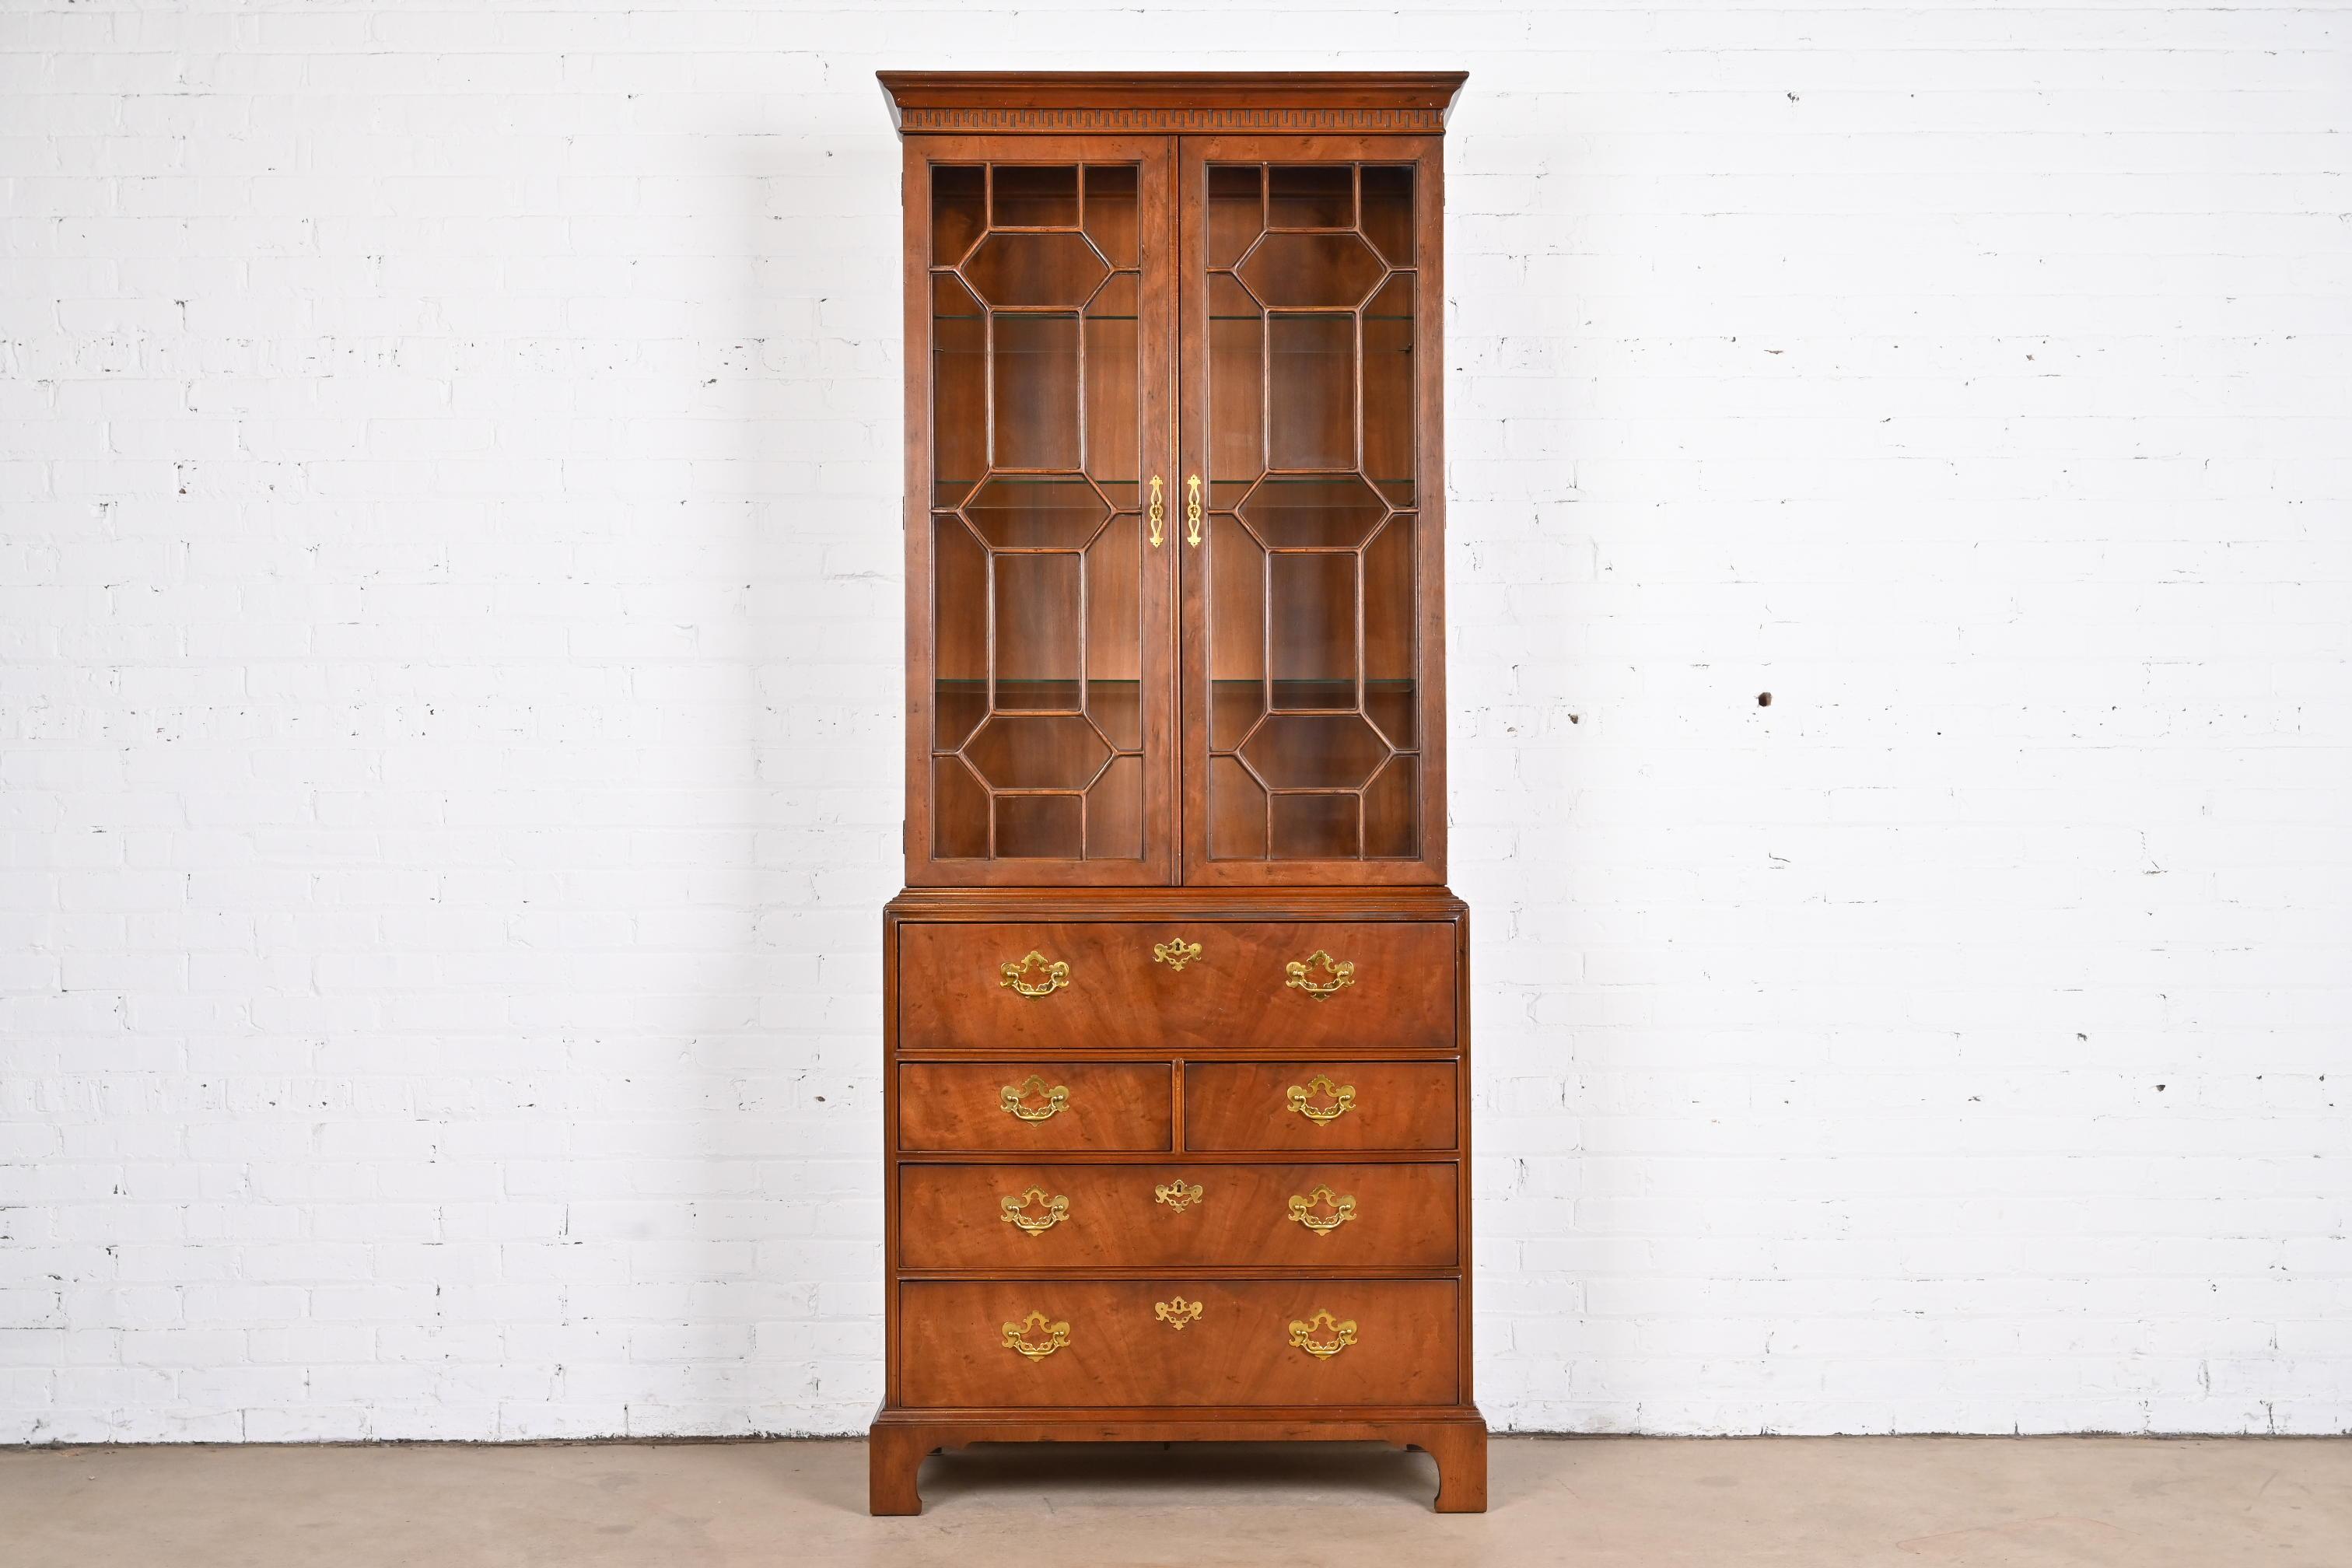 An exceptional Chippendale or Georgian style bureau with drop front secretary desk and lighted bookcase hutch top

By Henredon, 